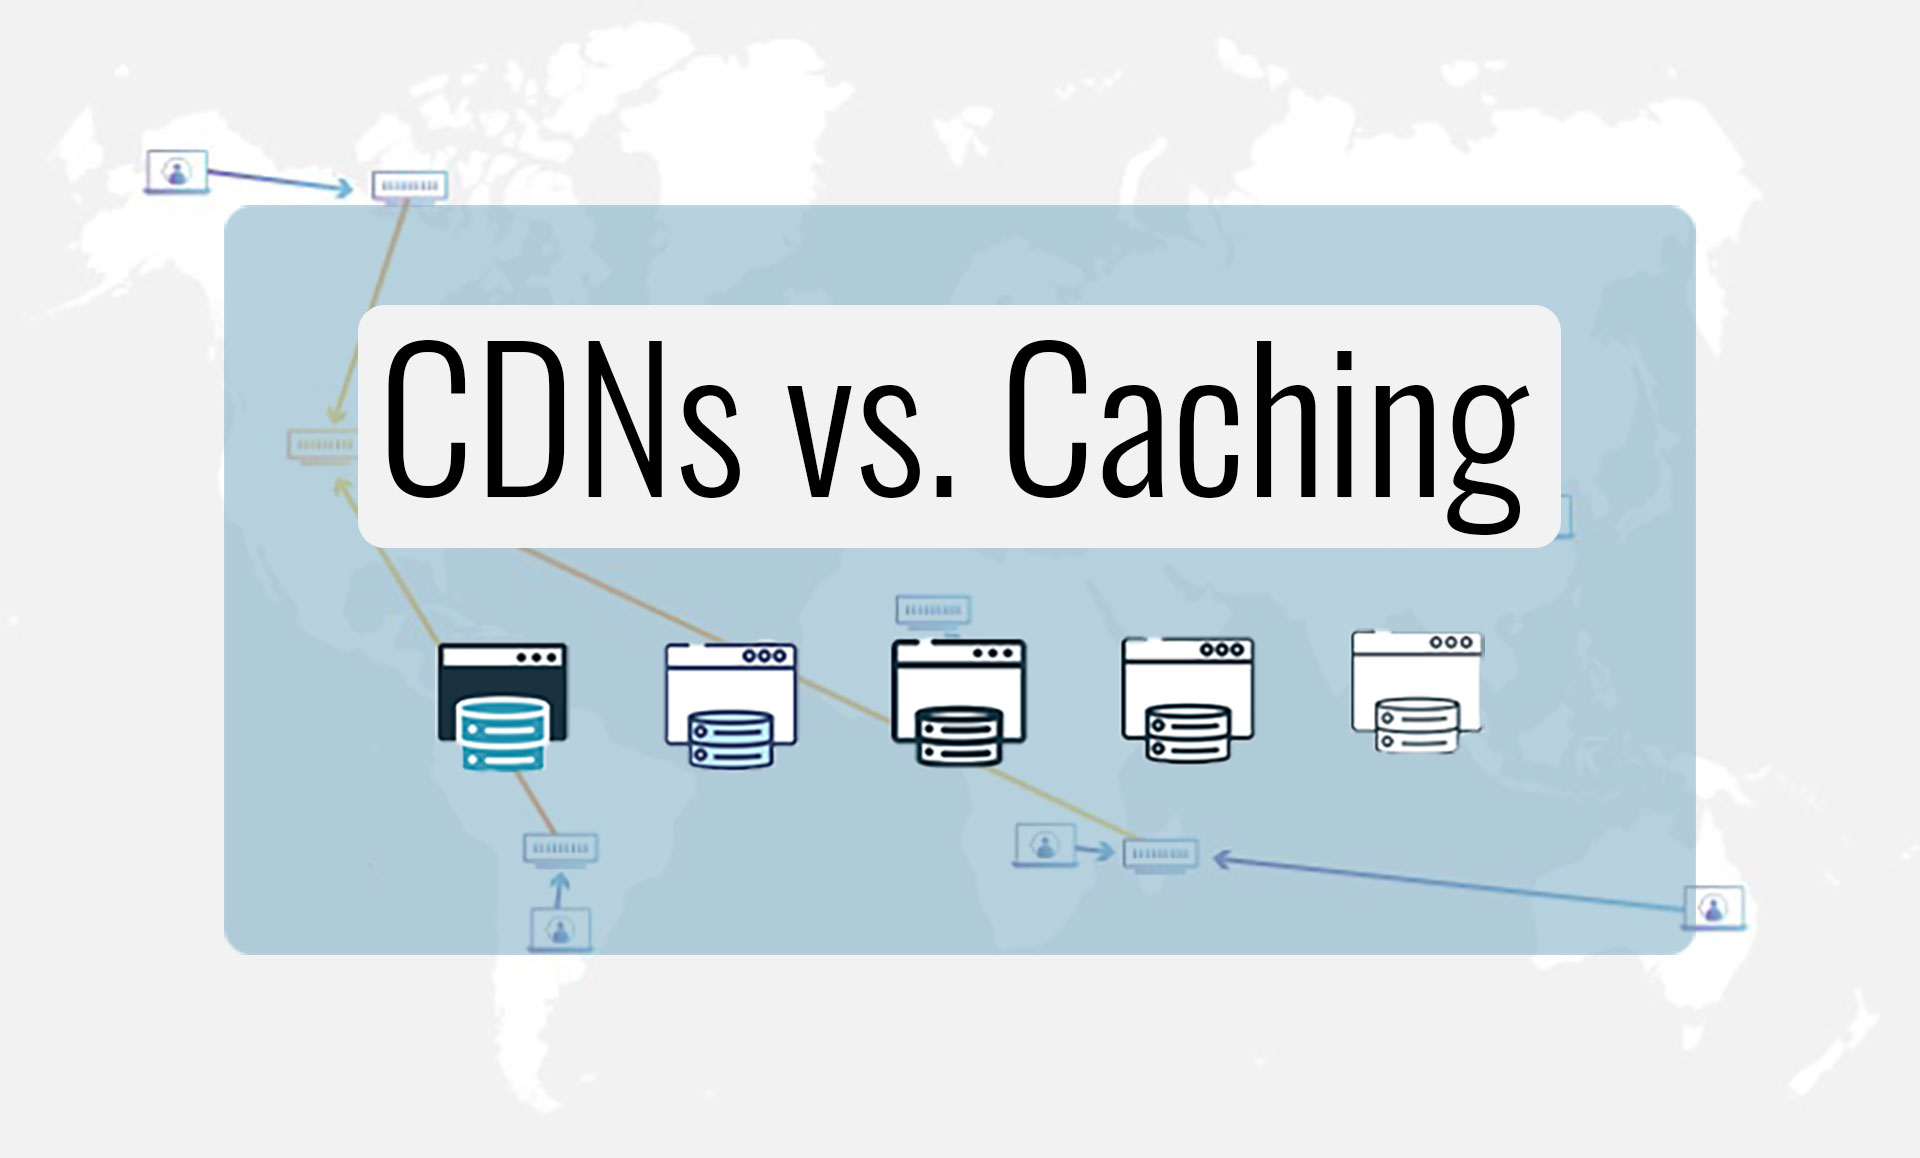 Content no cache. Cdn cache. Caching. Cdns increase the Global availability of content.